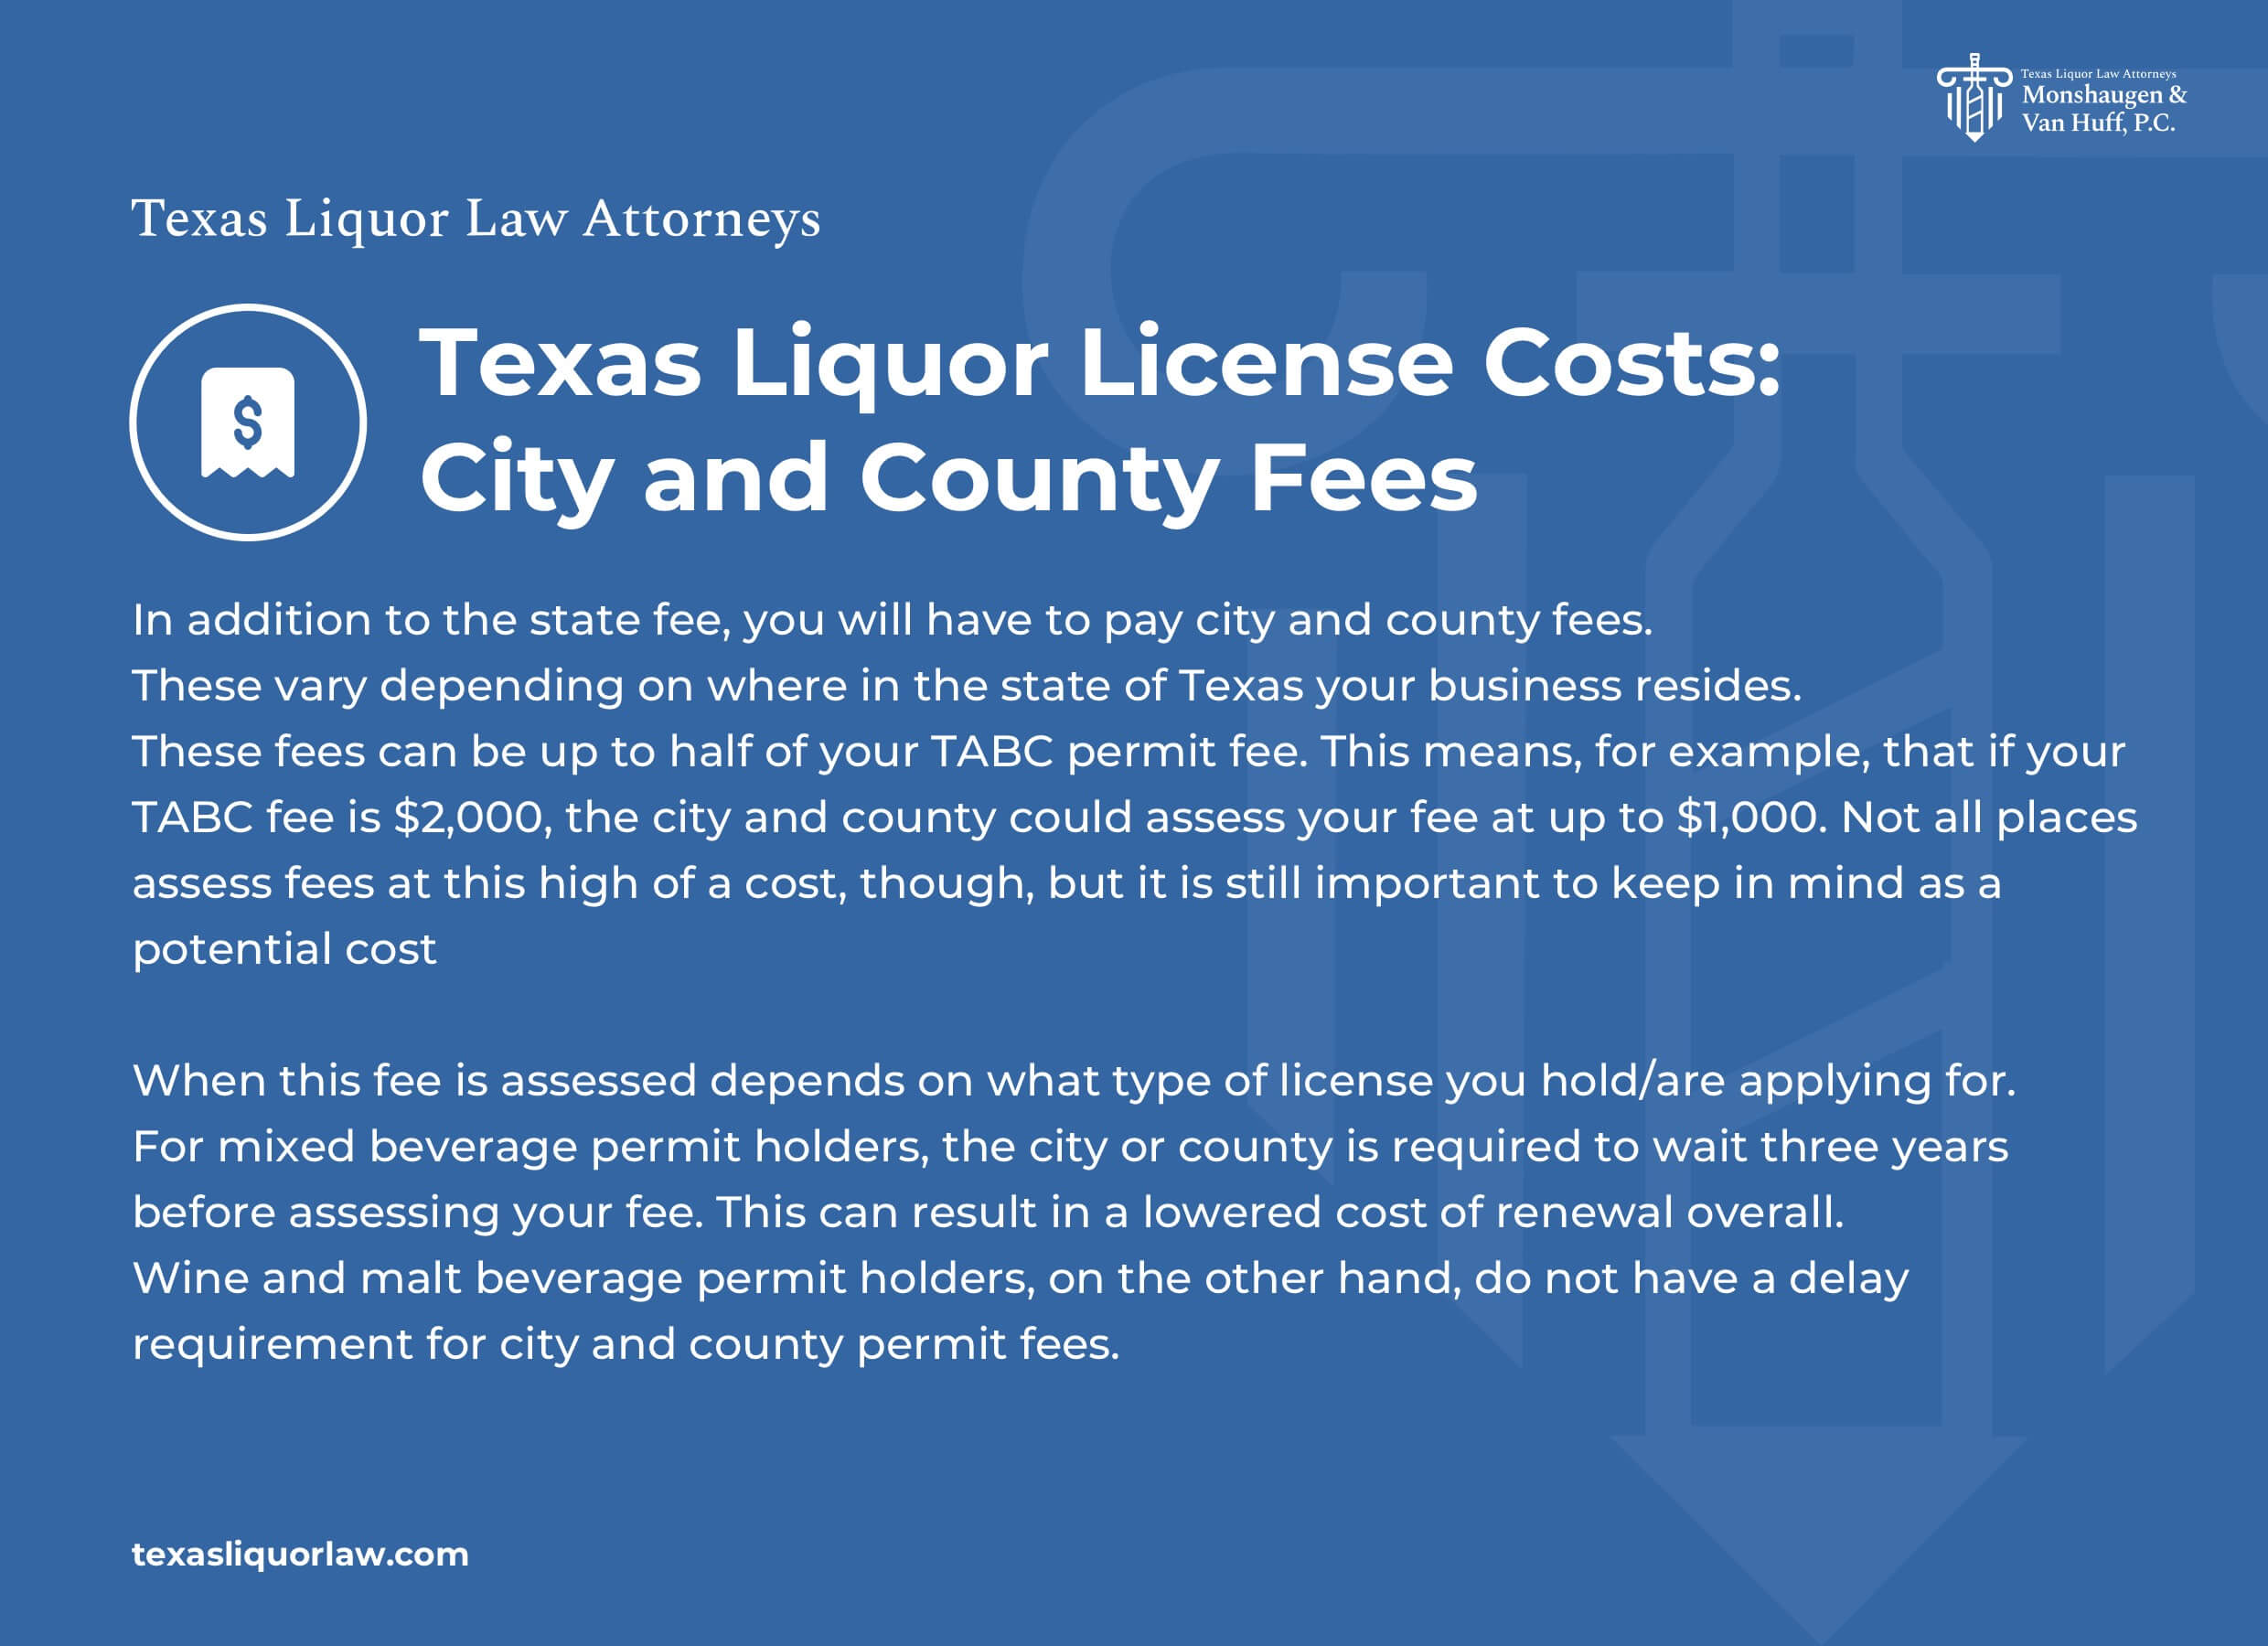 City and County Fees Texas Liquor License Costs